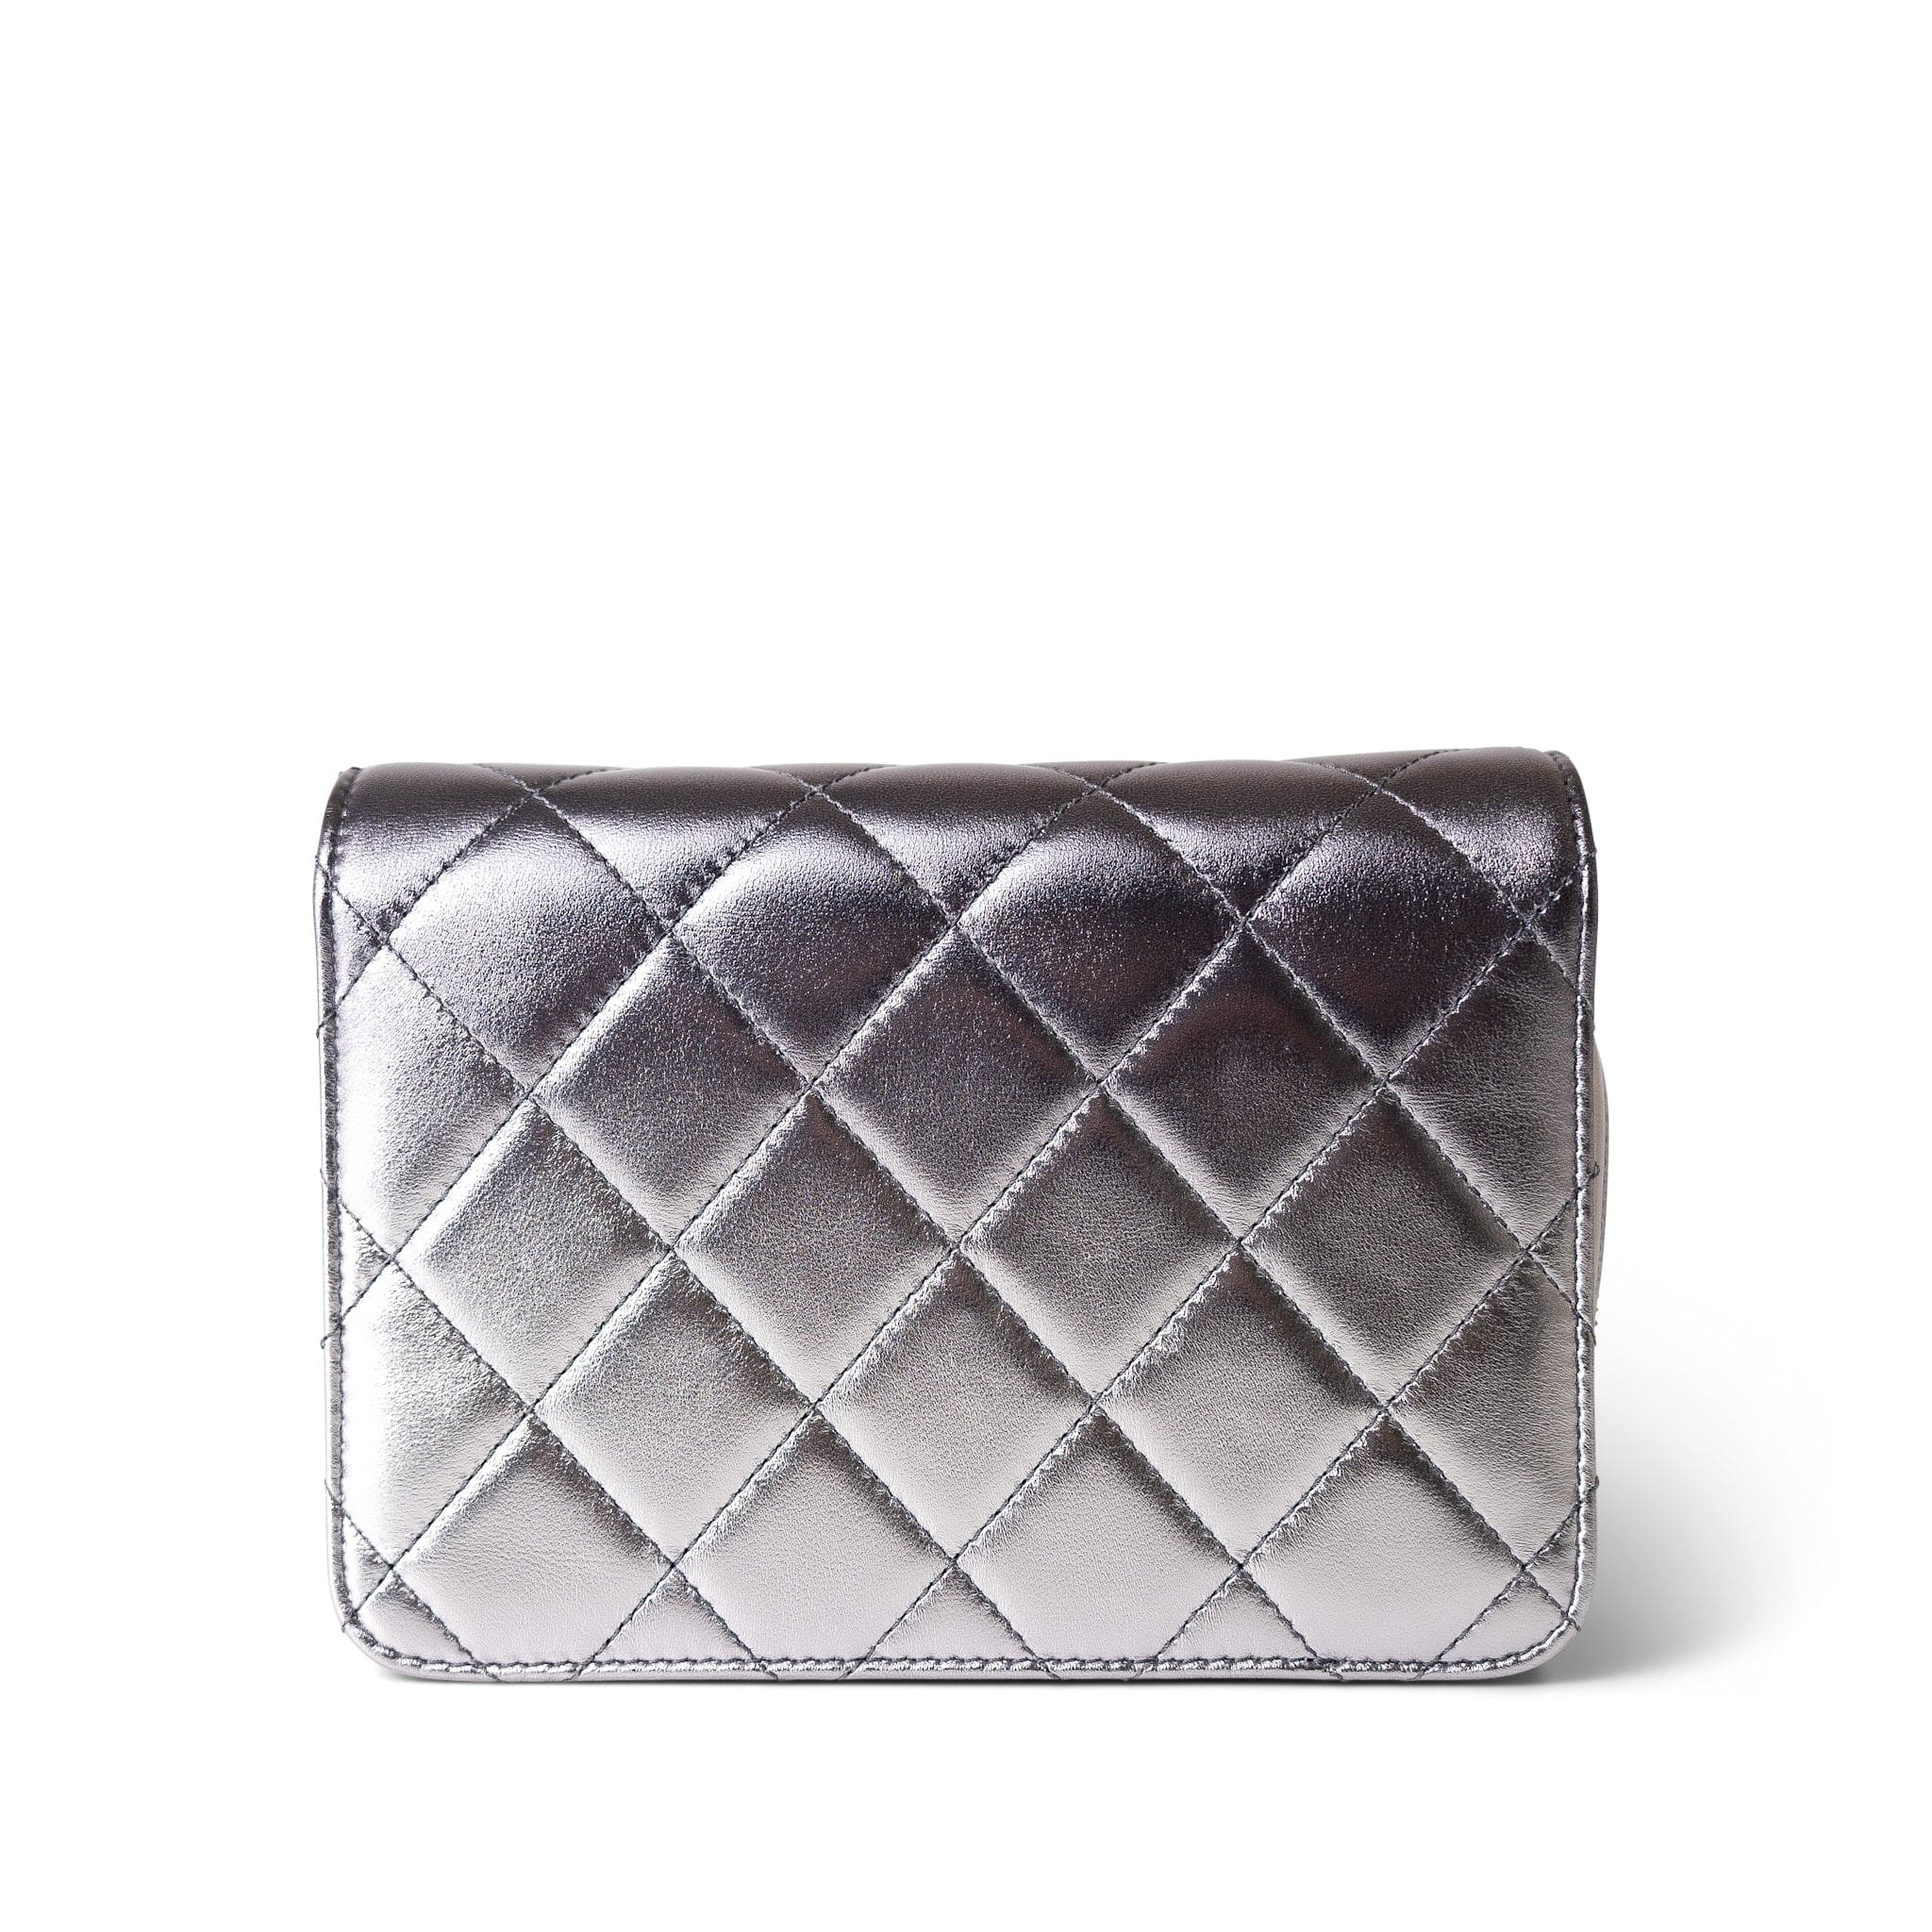 CHANEL Handbag Silver Like a Wallet Flap Bag Gradient Quilted Metallic Lambskin Silver Hardware - Redeluxe